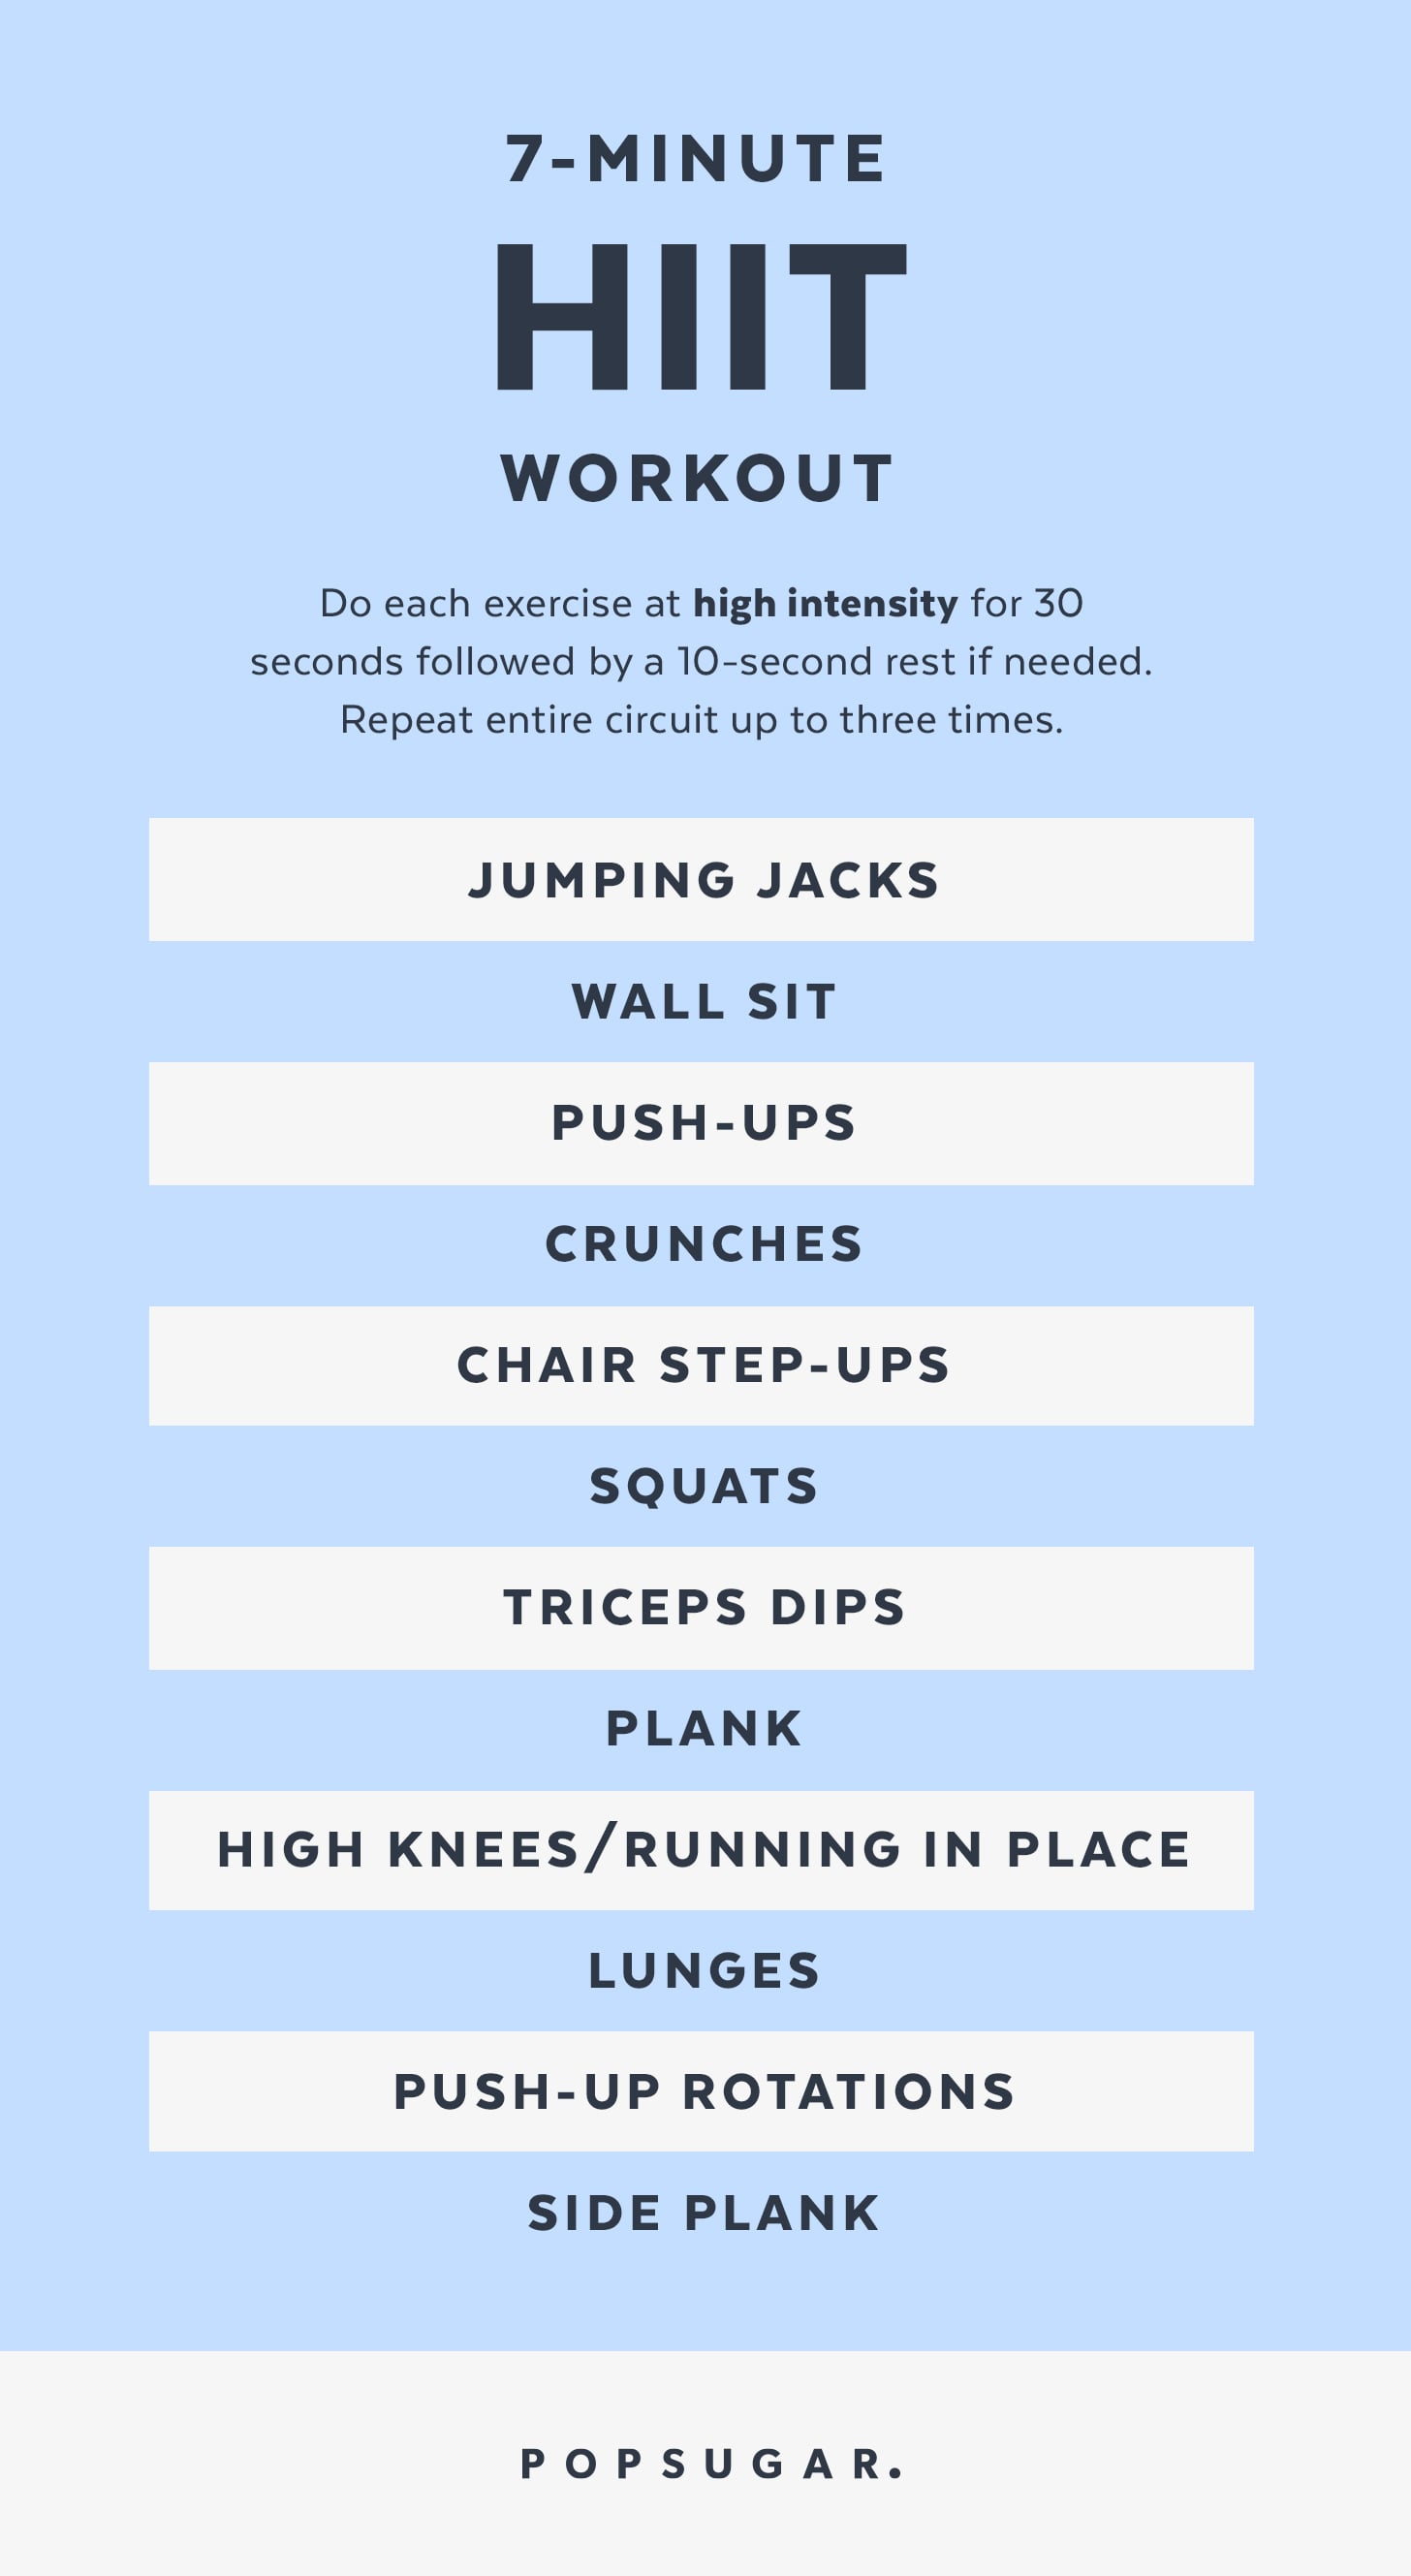 Hiit workout 30 minutes